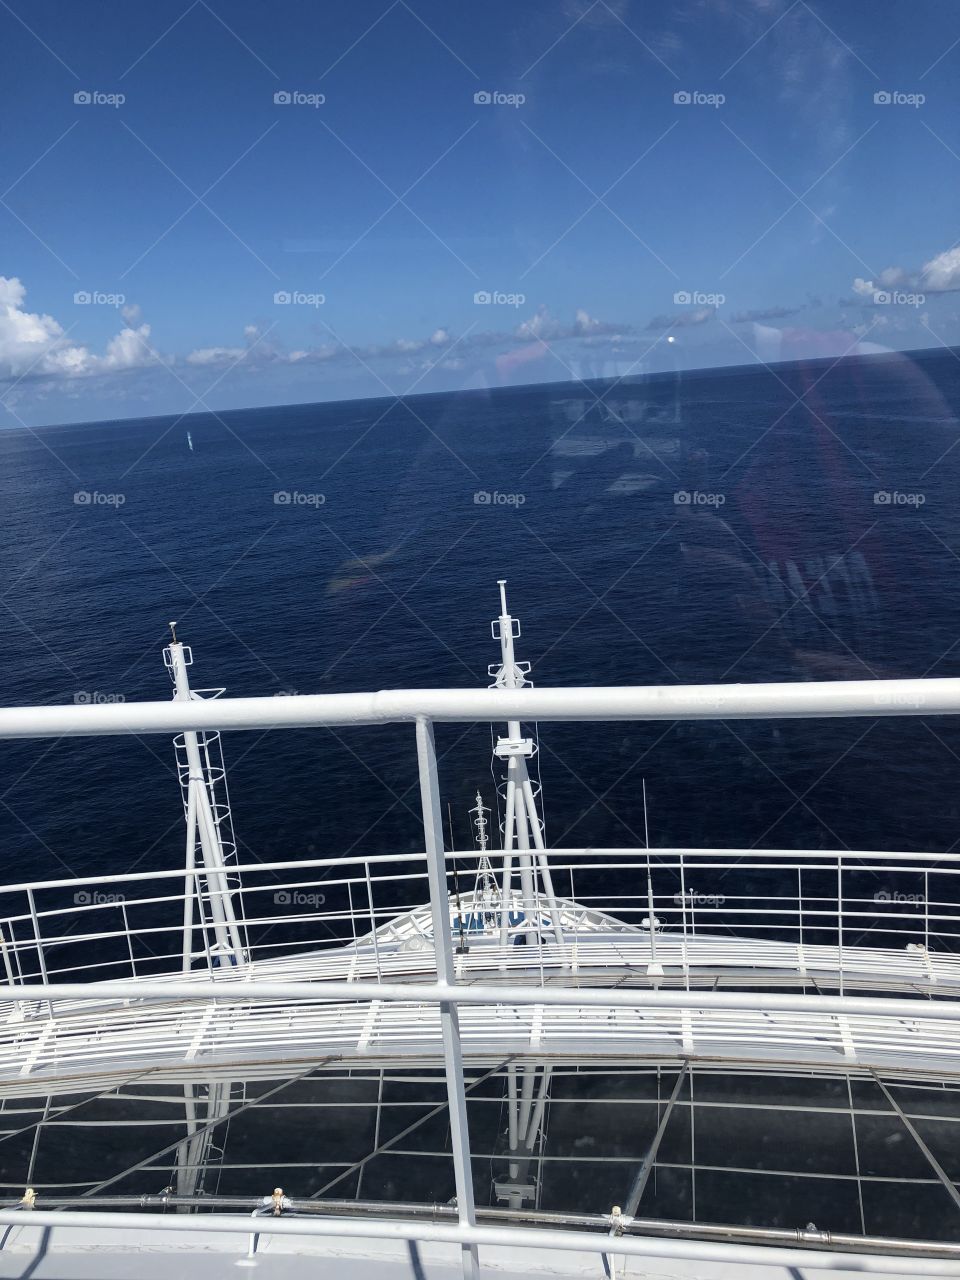 This was our first day at Sea September 2, 2018!